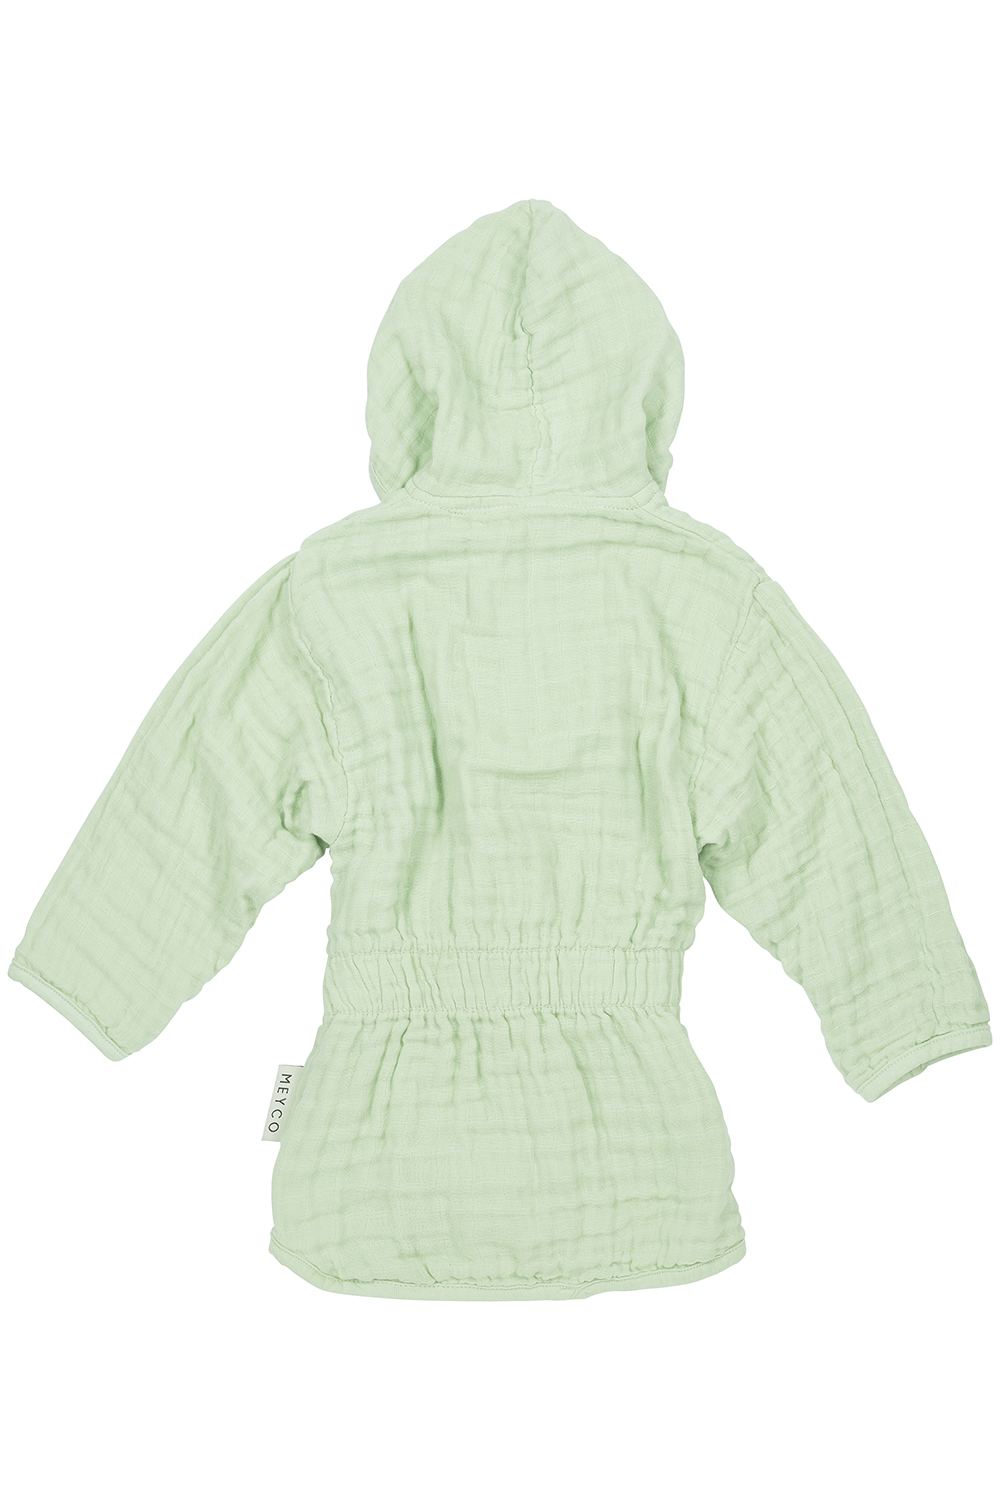 Bademantel pre-washed musselin Uni - soft green - 74/80